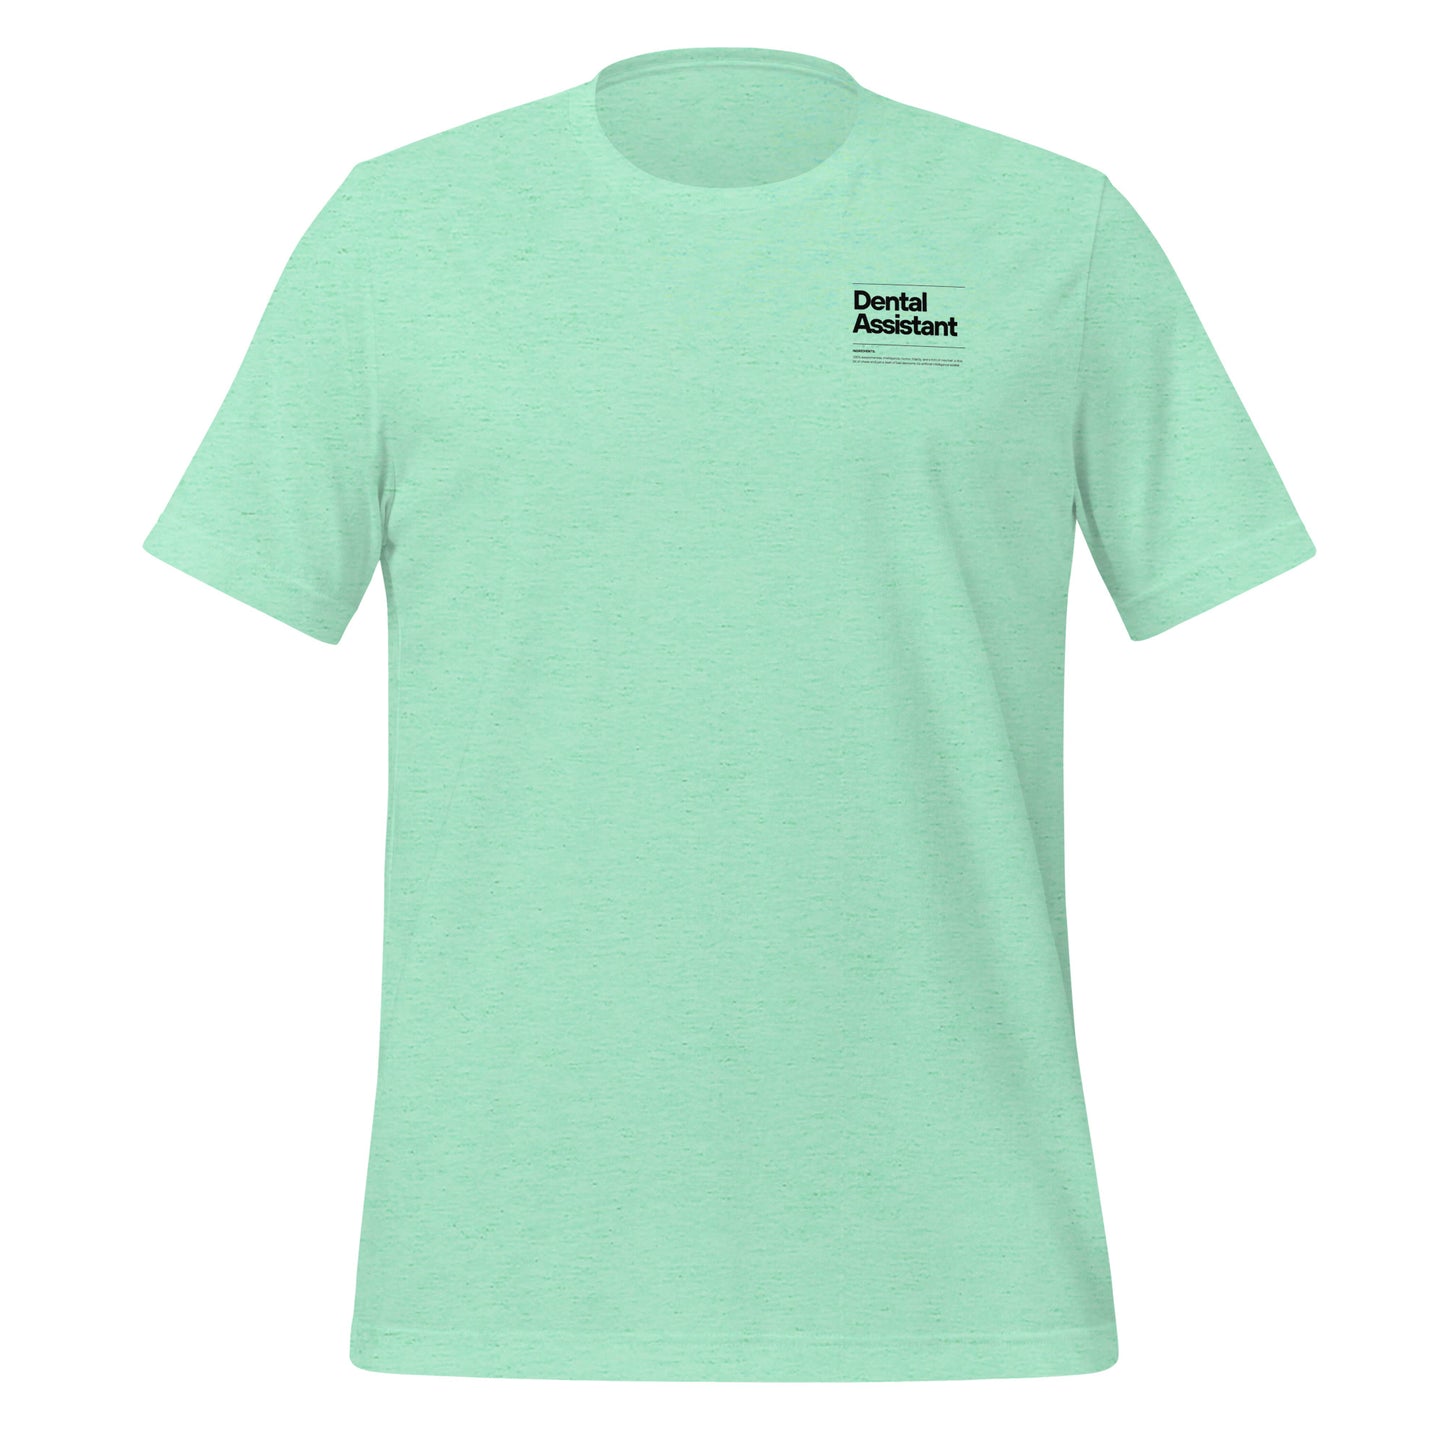 Heather mint dental assistant shirt featuring a creative label design with icons and text, perfect for dental assistants who want to express their identity and passion for their job - dental shirts front view.